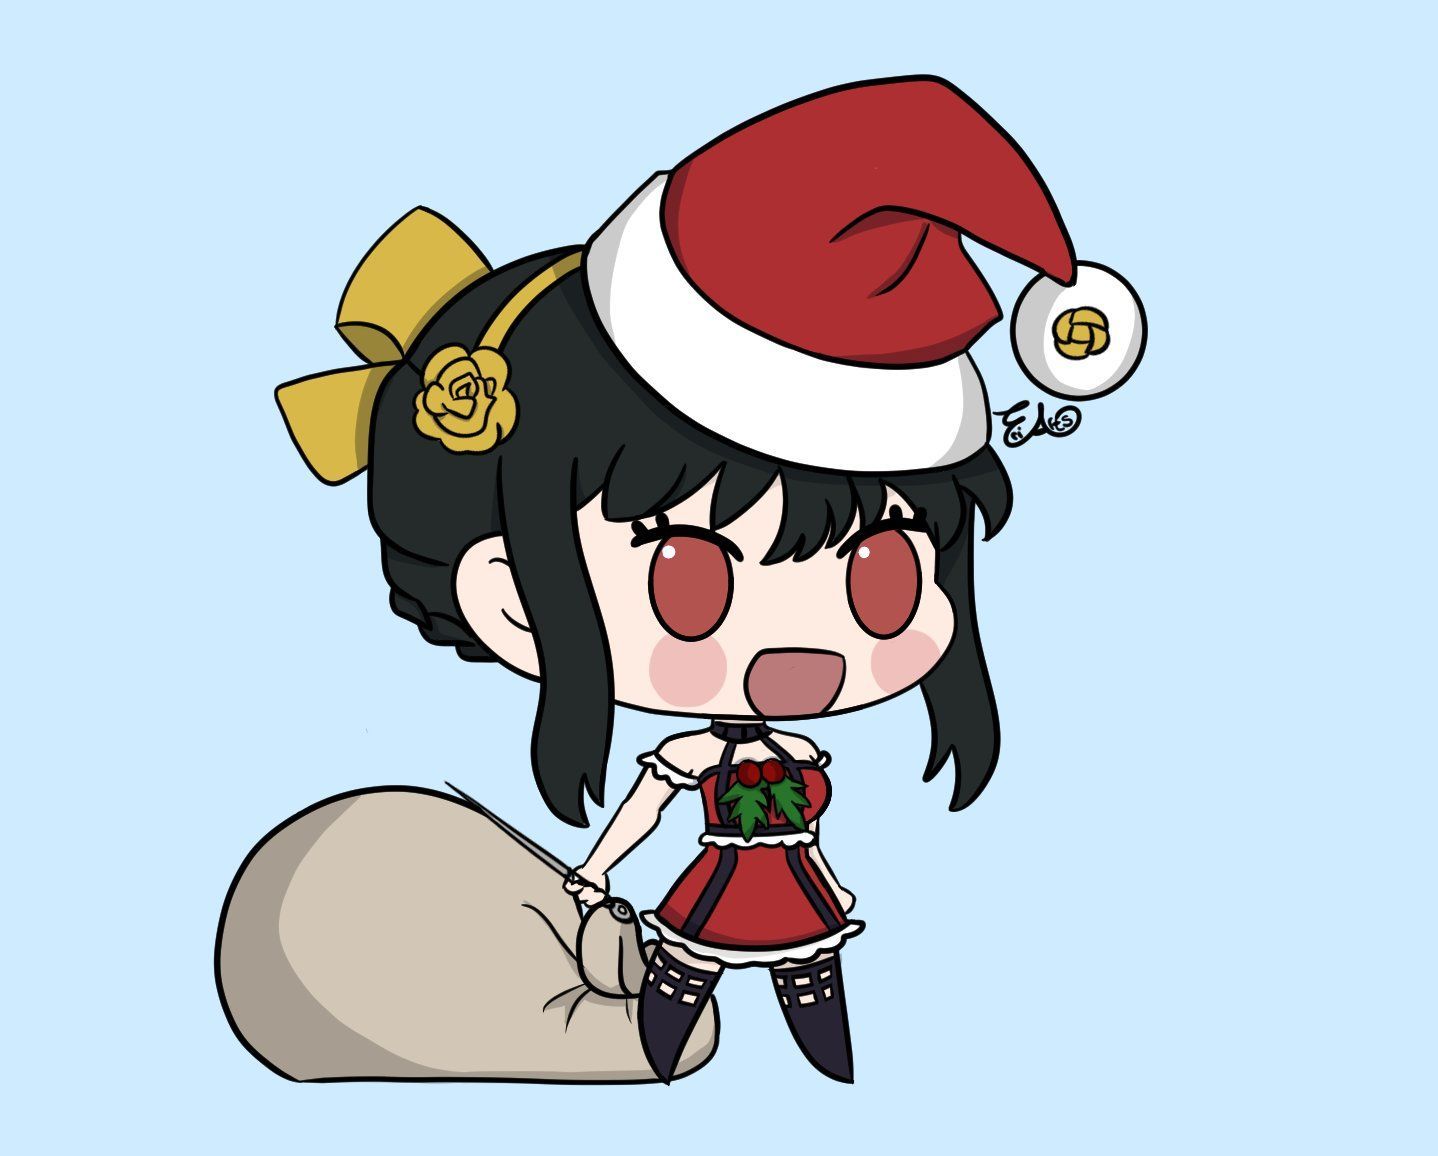 Versions of Yor Forger Padoru drawn by @_EriArts